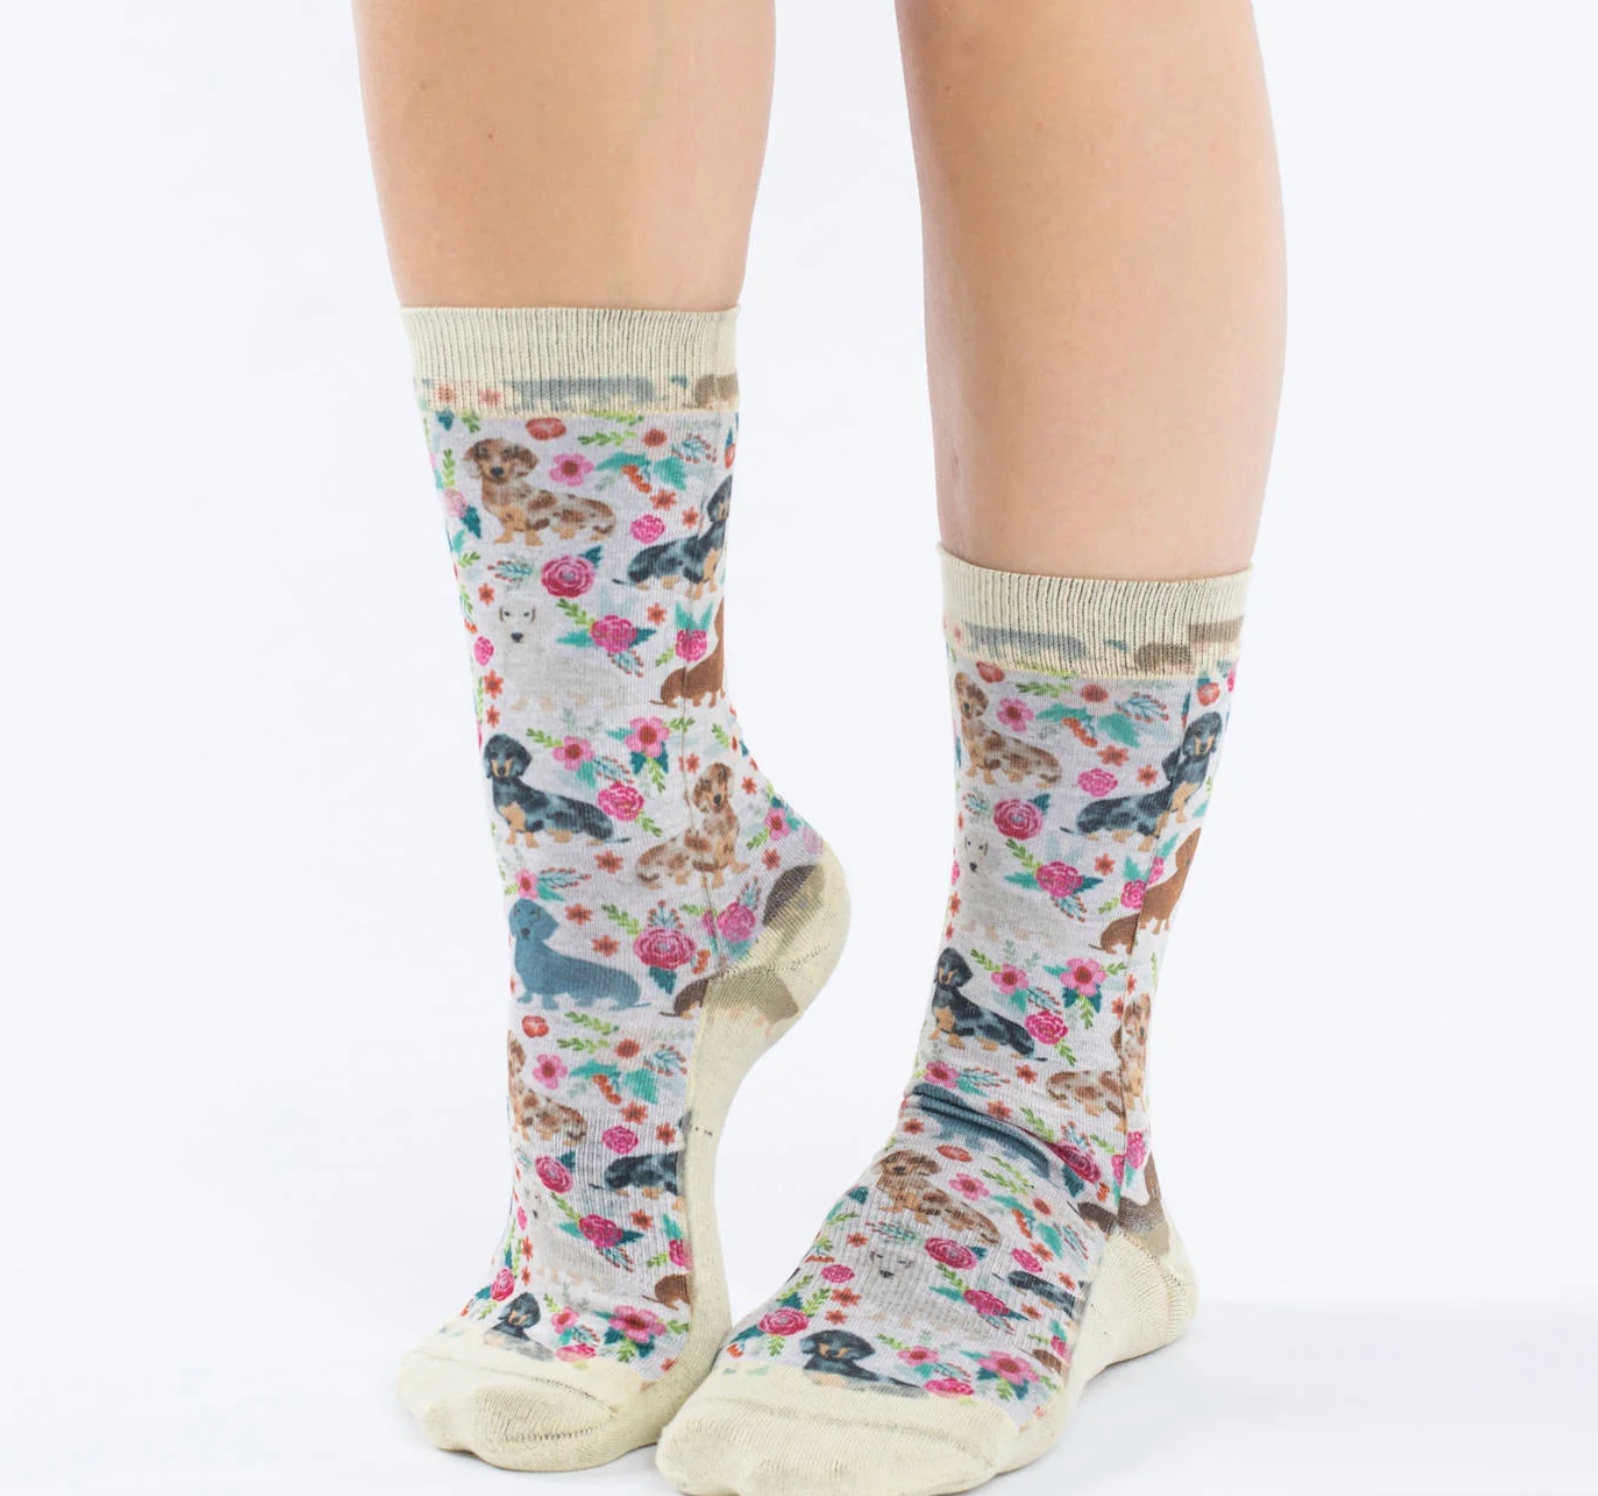 Sock - Small Crew: Floral Dachshunds